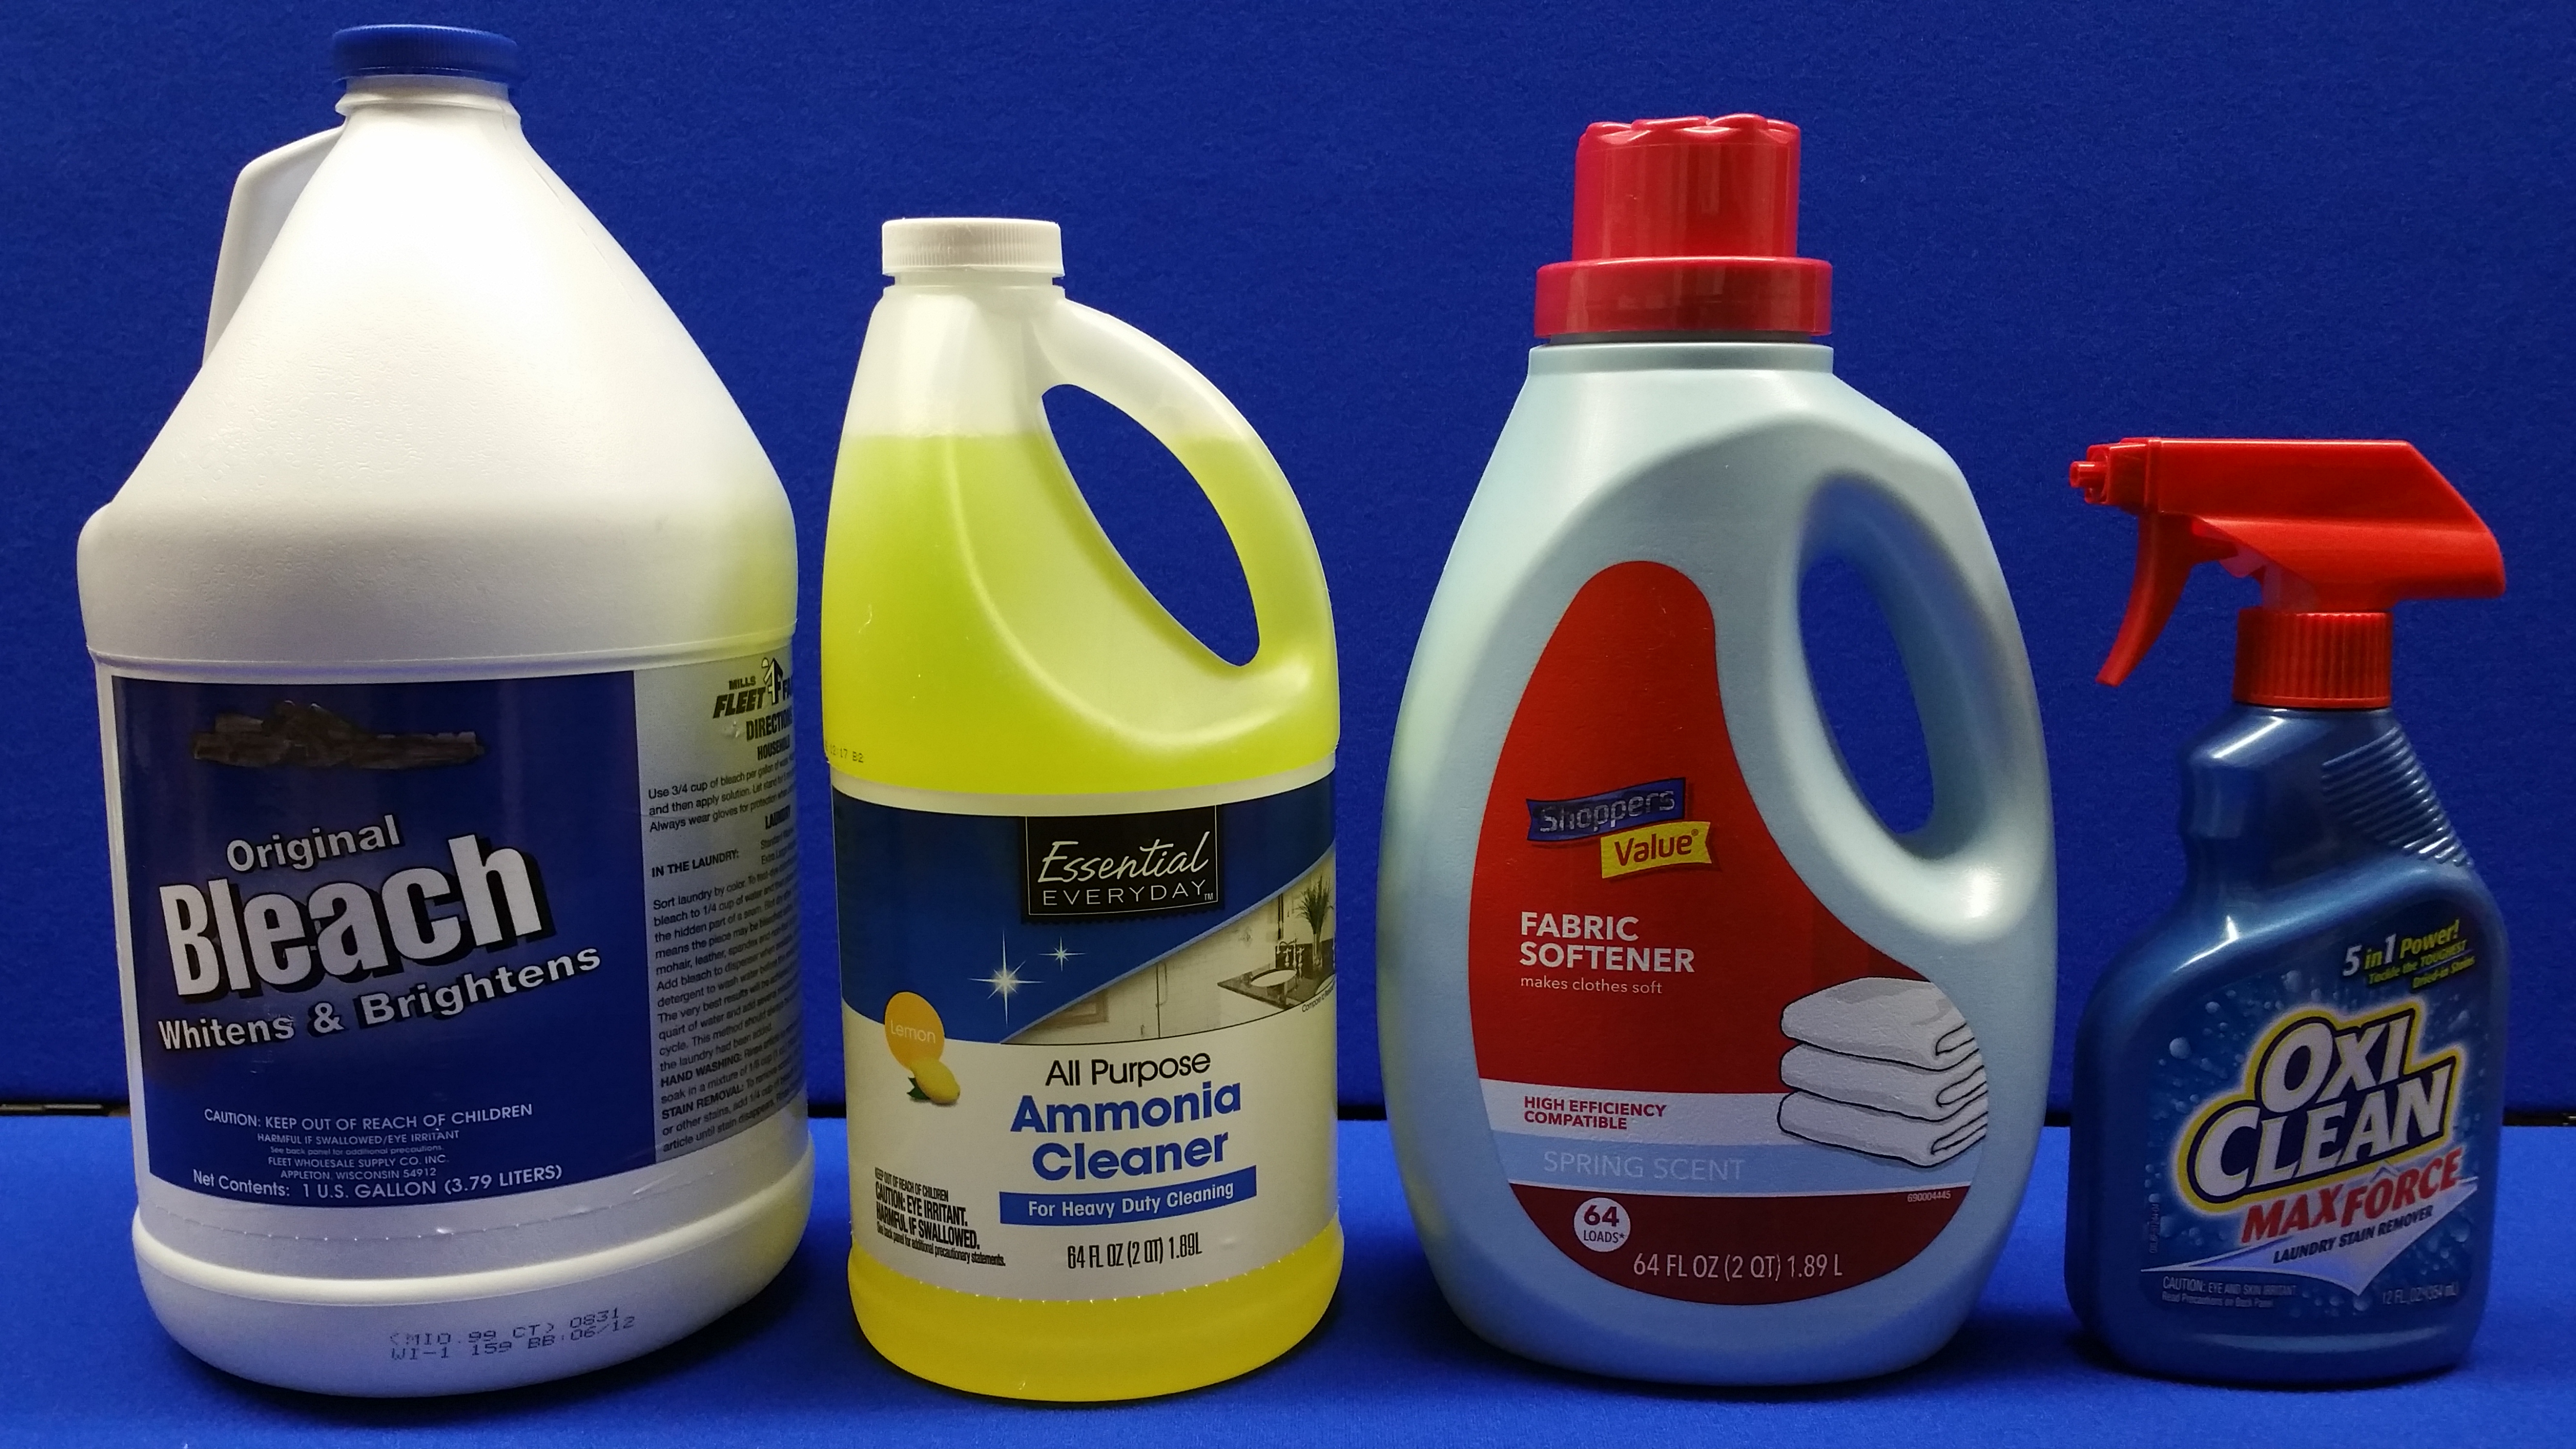 bleach and cleaning products in bottles 